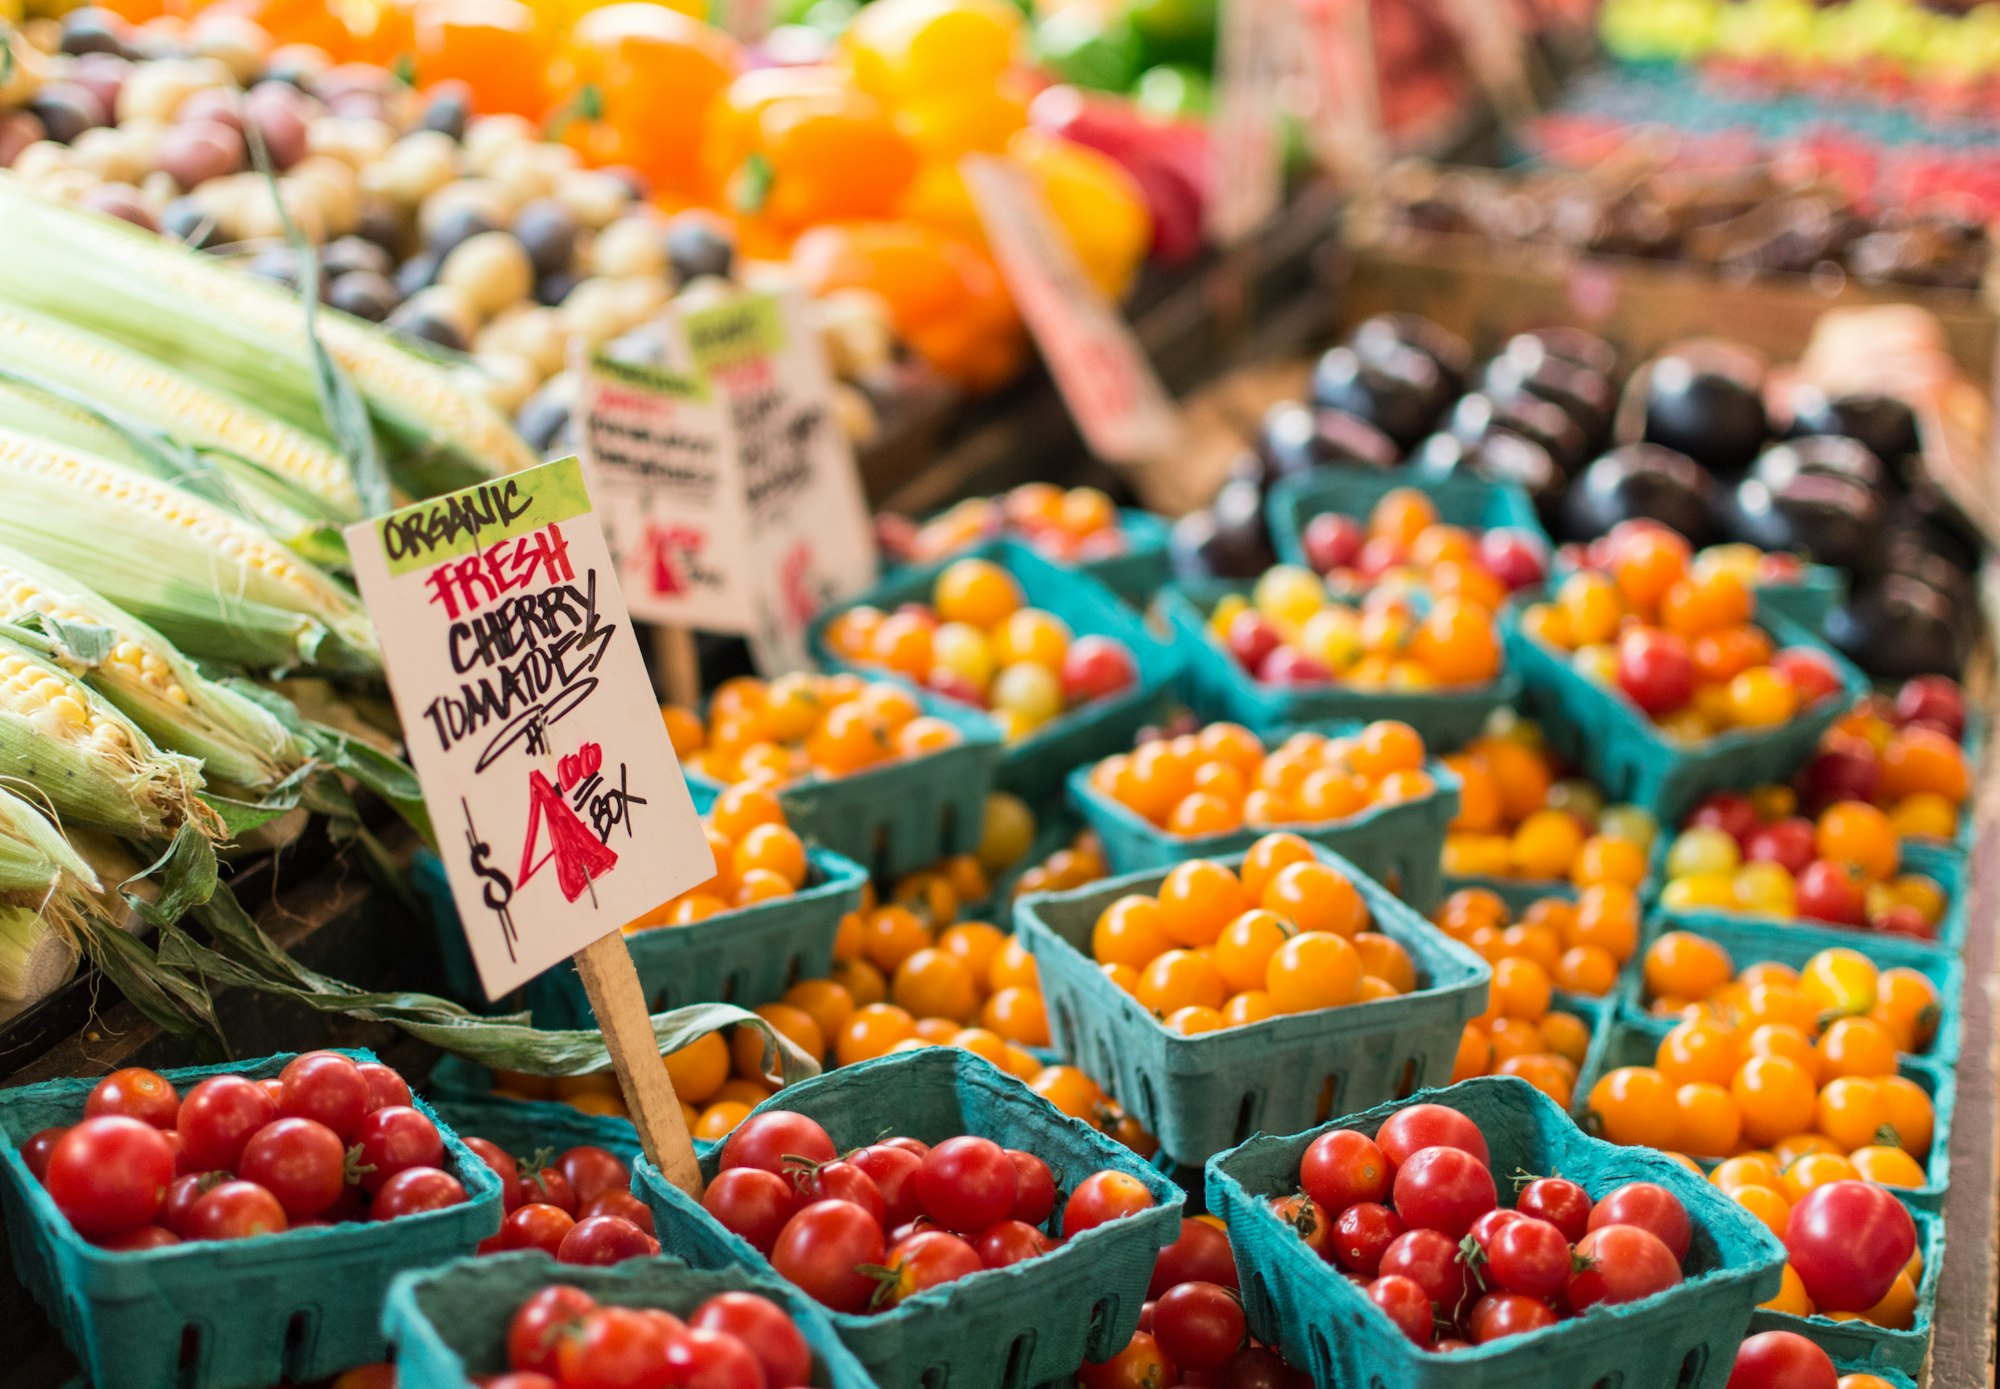 Where to find Madison farmers' markets